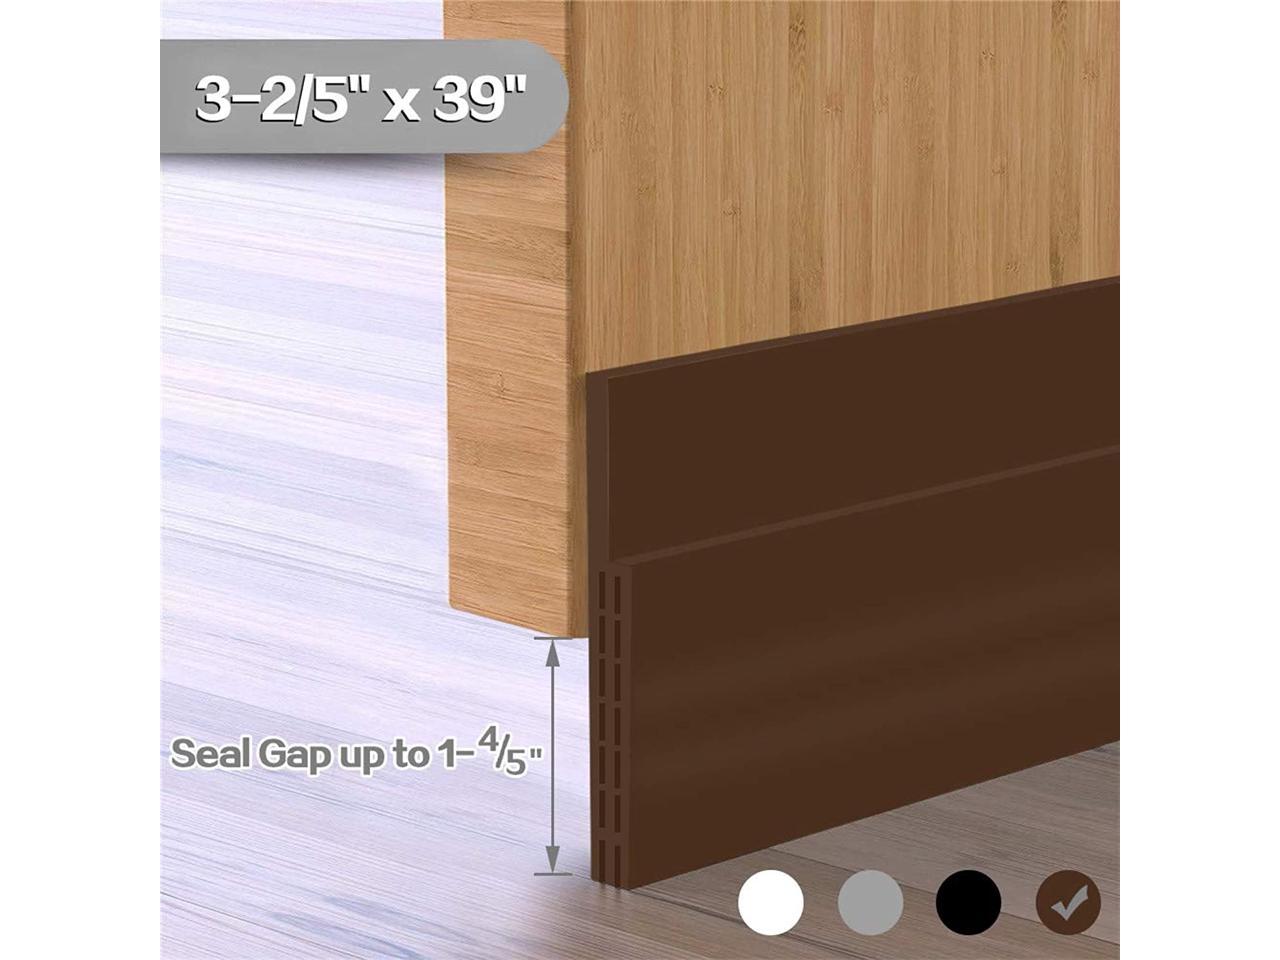 Noise and Unwanted Animals Large Gap Door Draft Stopper Dust 3-2/5W Widened Door Sweep for Interior and Exterior Doors 3-2/5W x 39L, Brown Upgraded Guard Against Drafts 